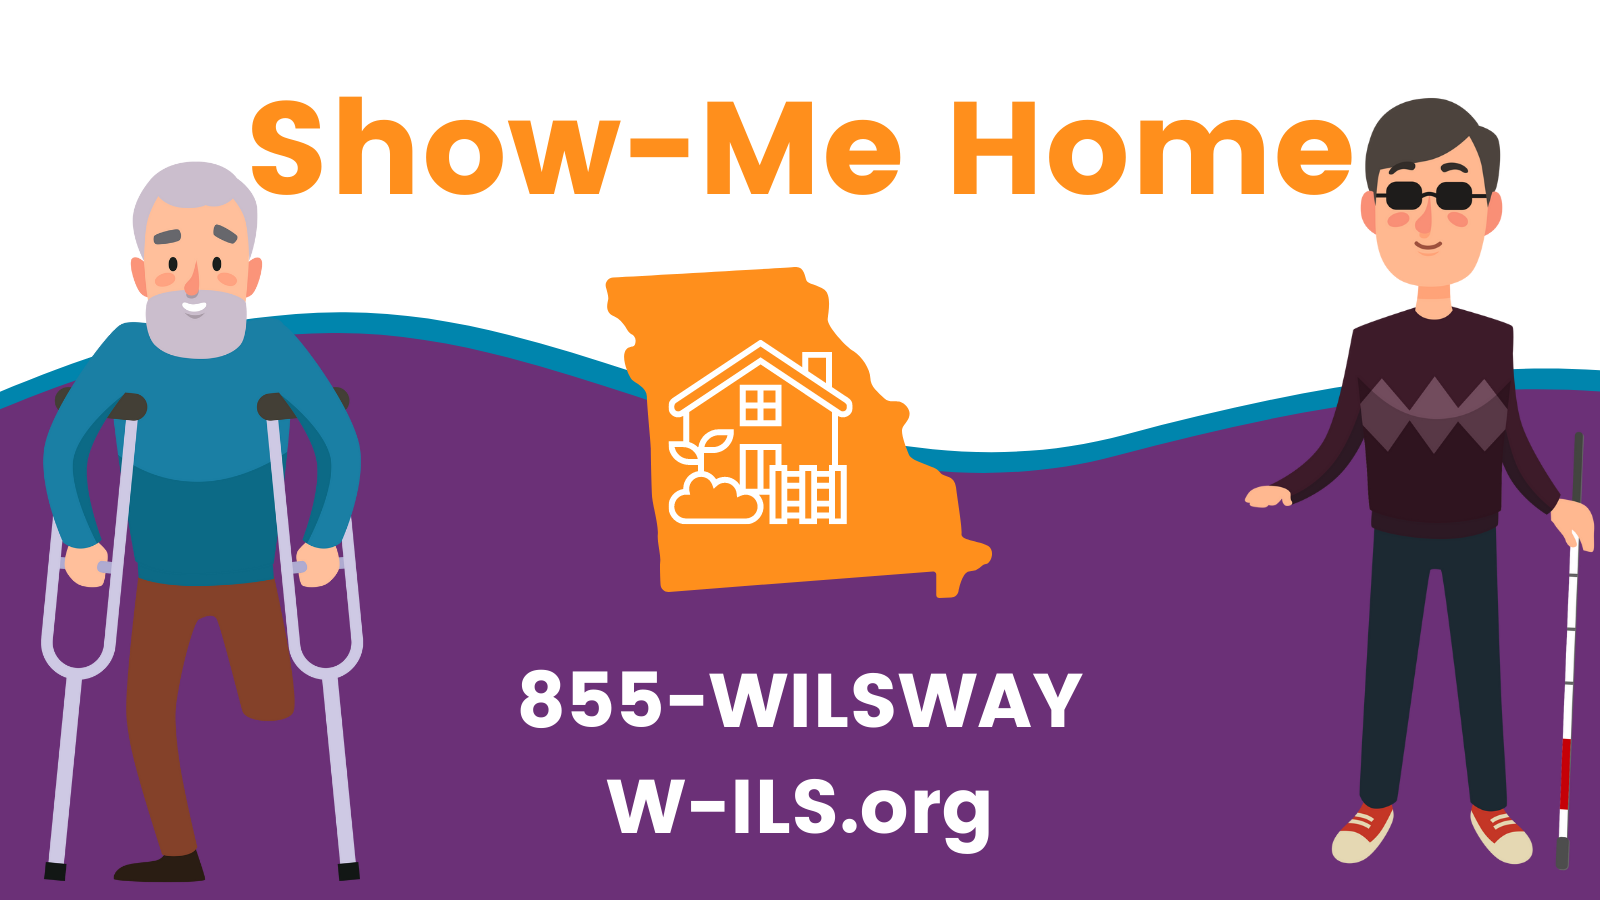 Show-Me Home. Call 855-WILSWAY or visit W-ILS.org